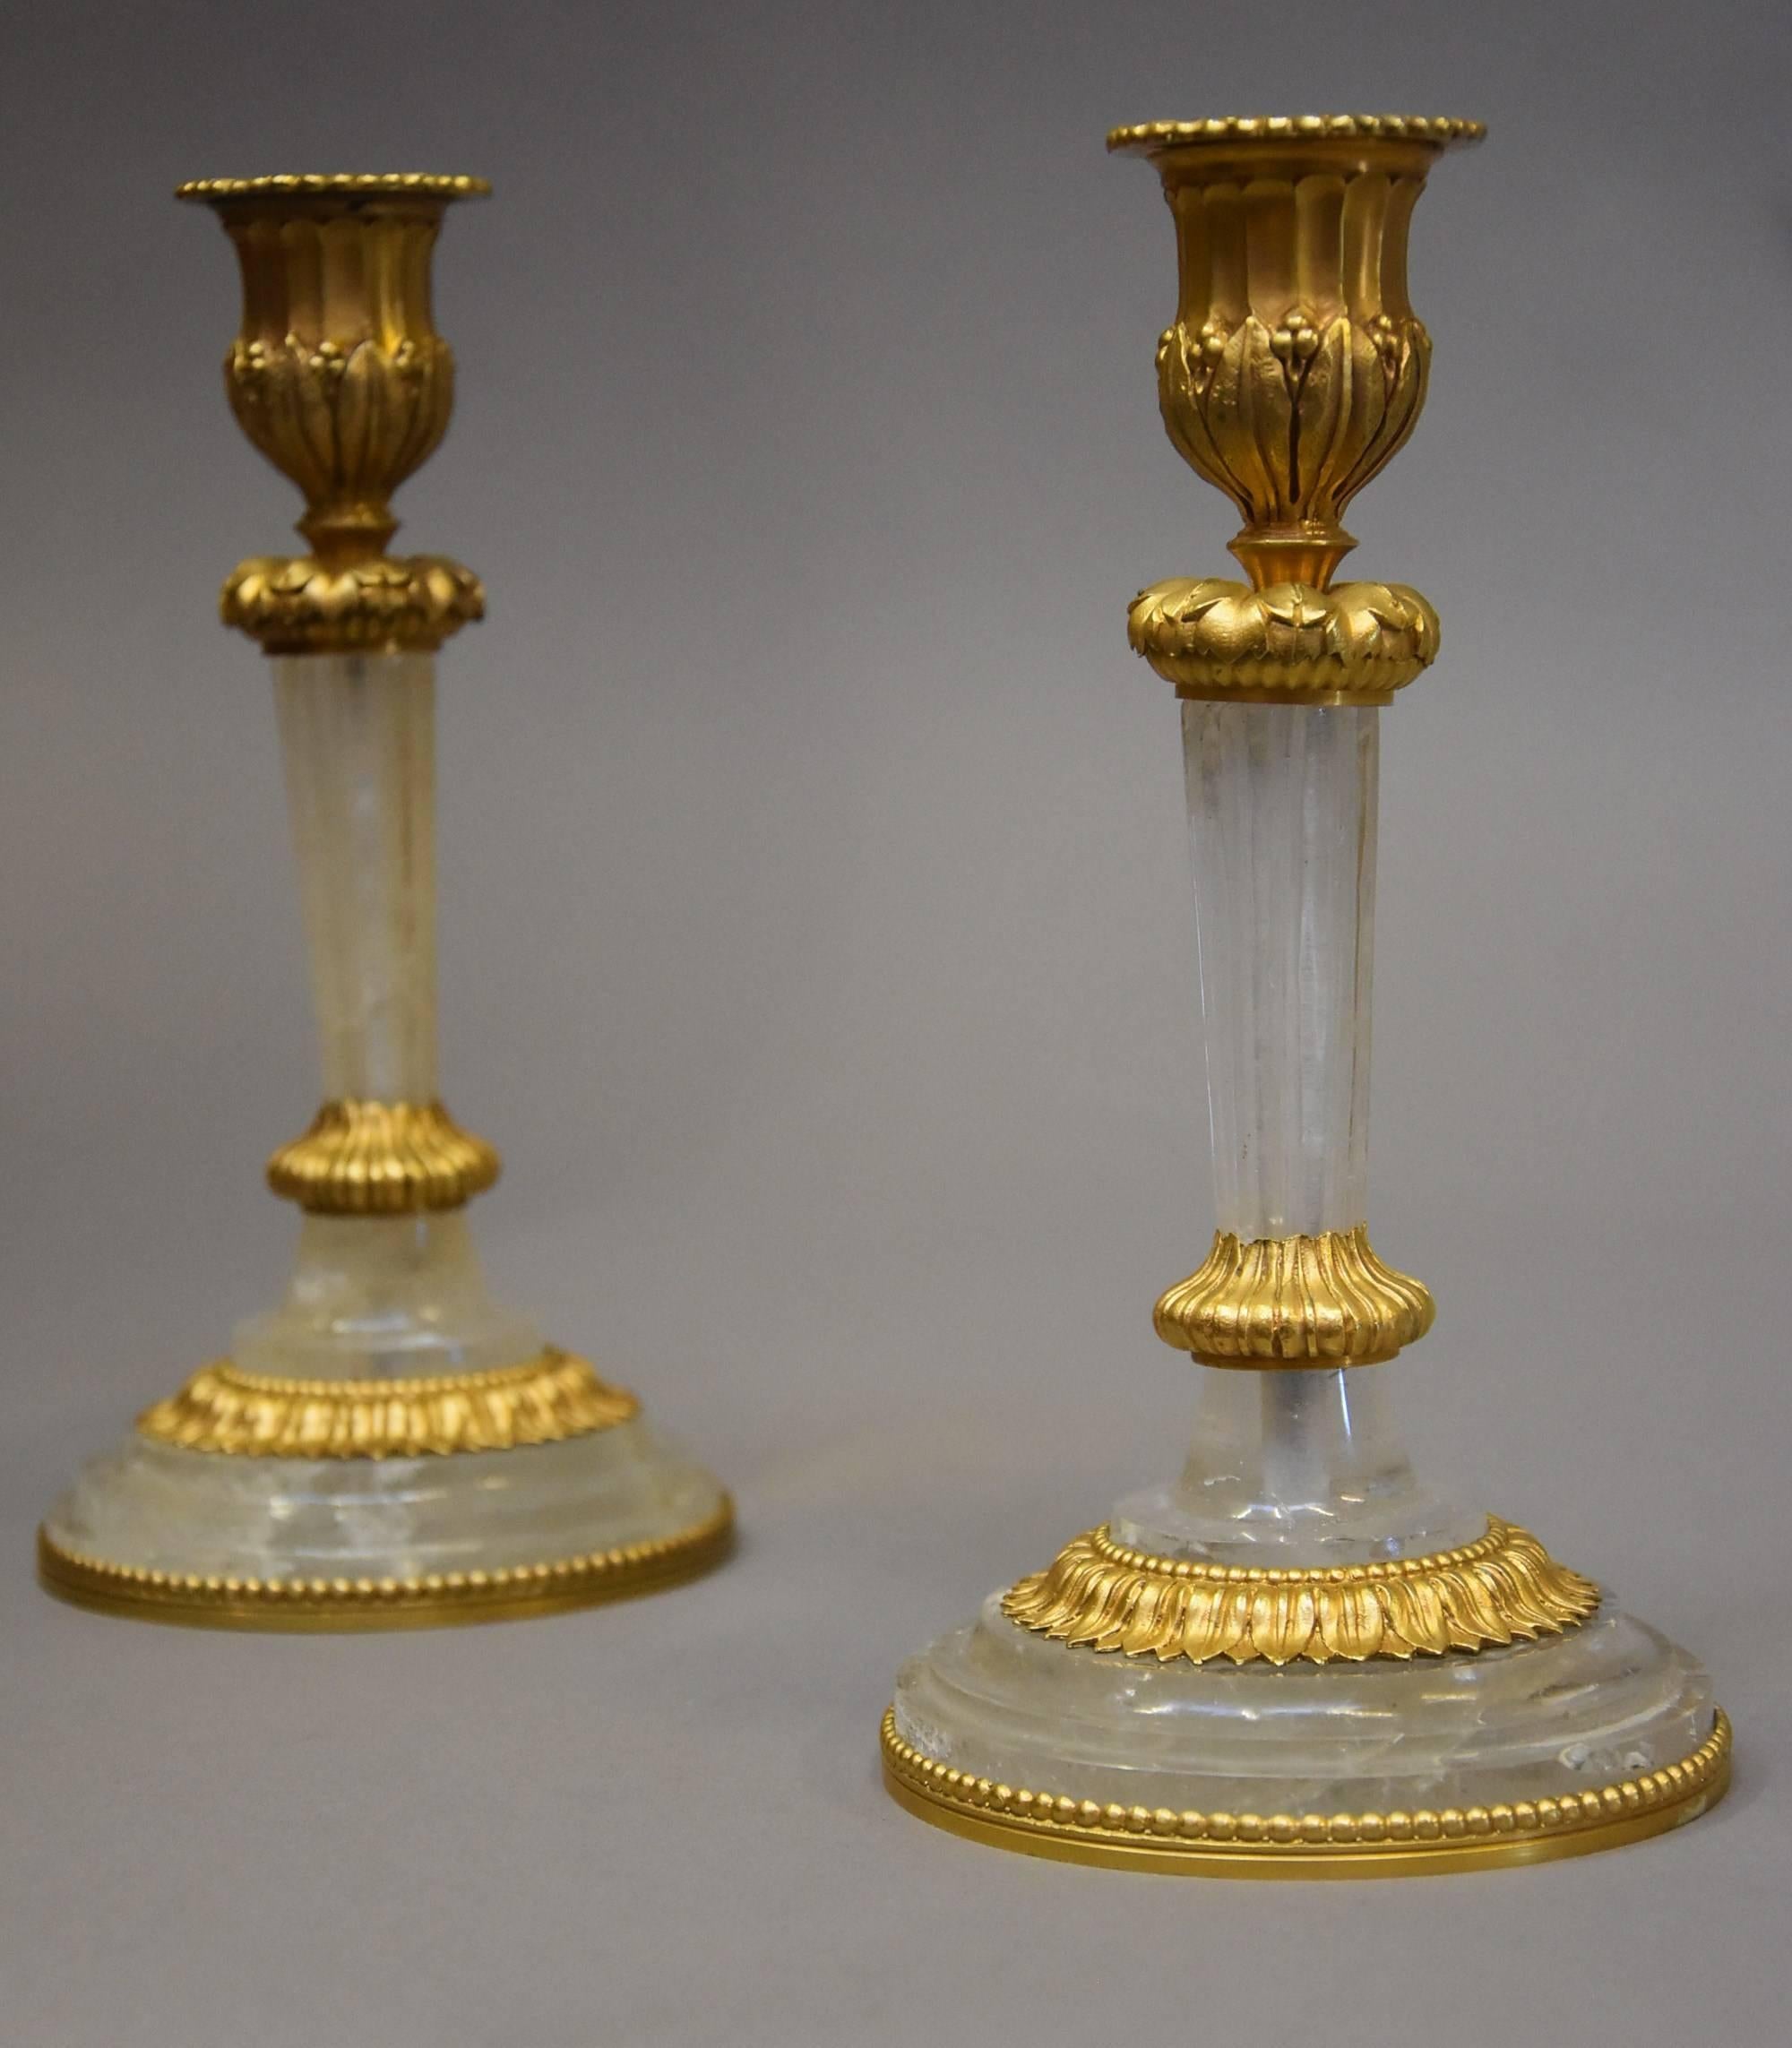 European Pair of Elegant Early 20th Century Rock Crystal and Ormolu Candlesticks For Sale